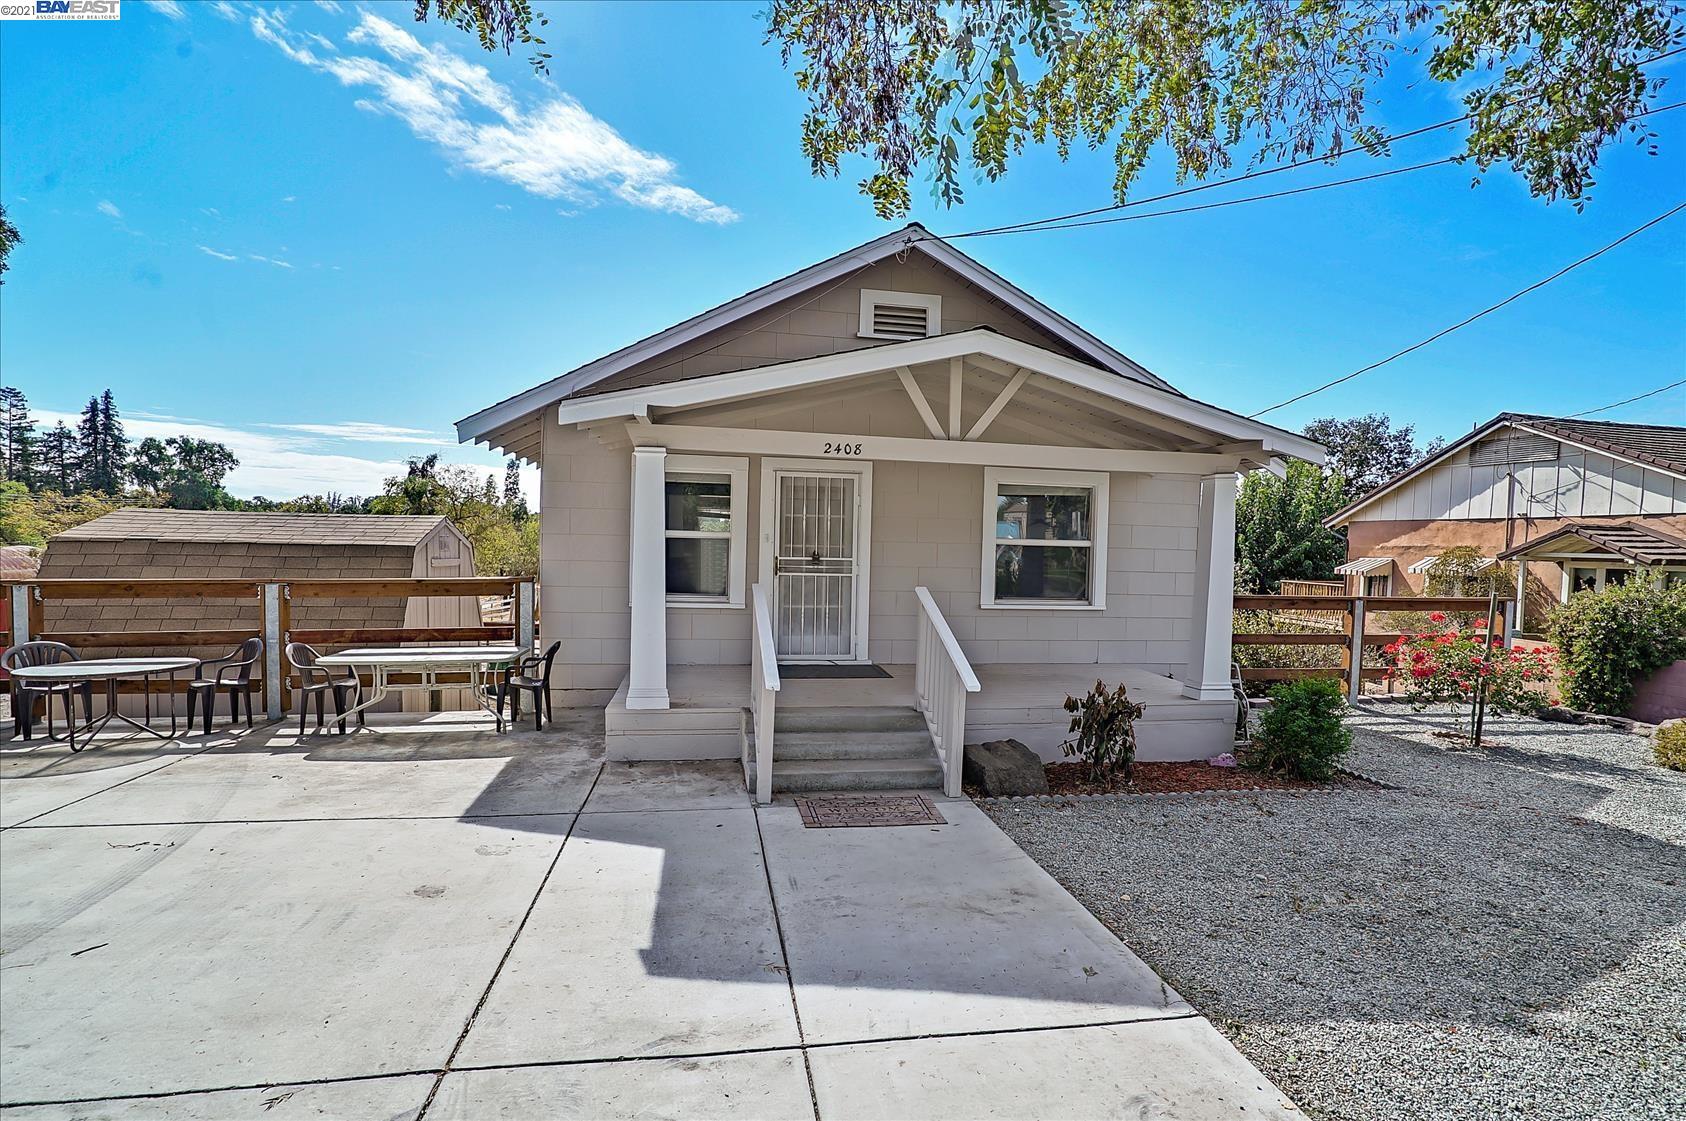 Detail Gallery Image 1 of 1 For 2408 Scenic Dr, Modesto,  CA 95355-4506 - 2 Beds | 1 Baths